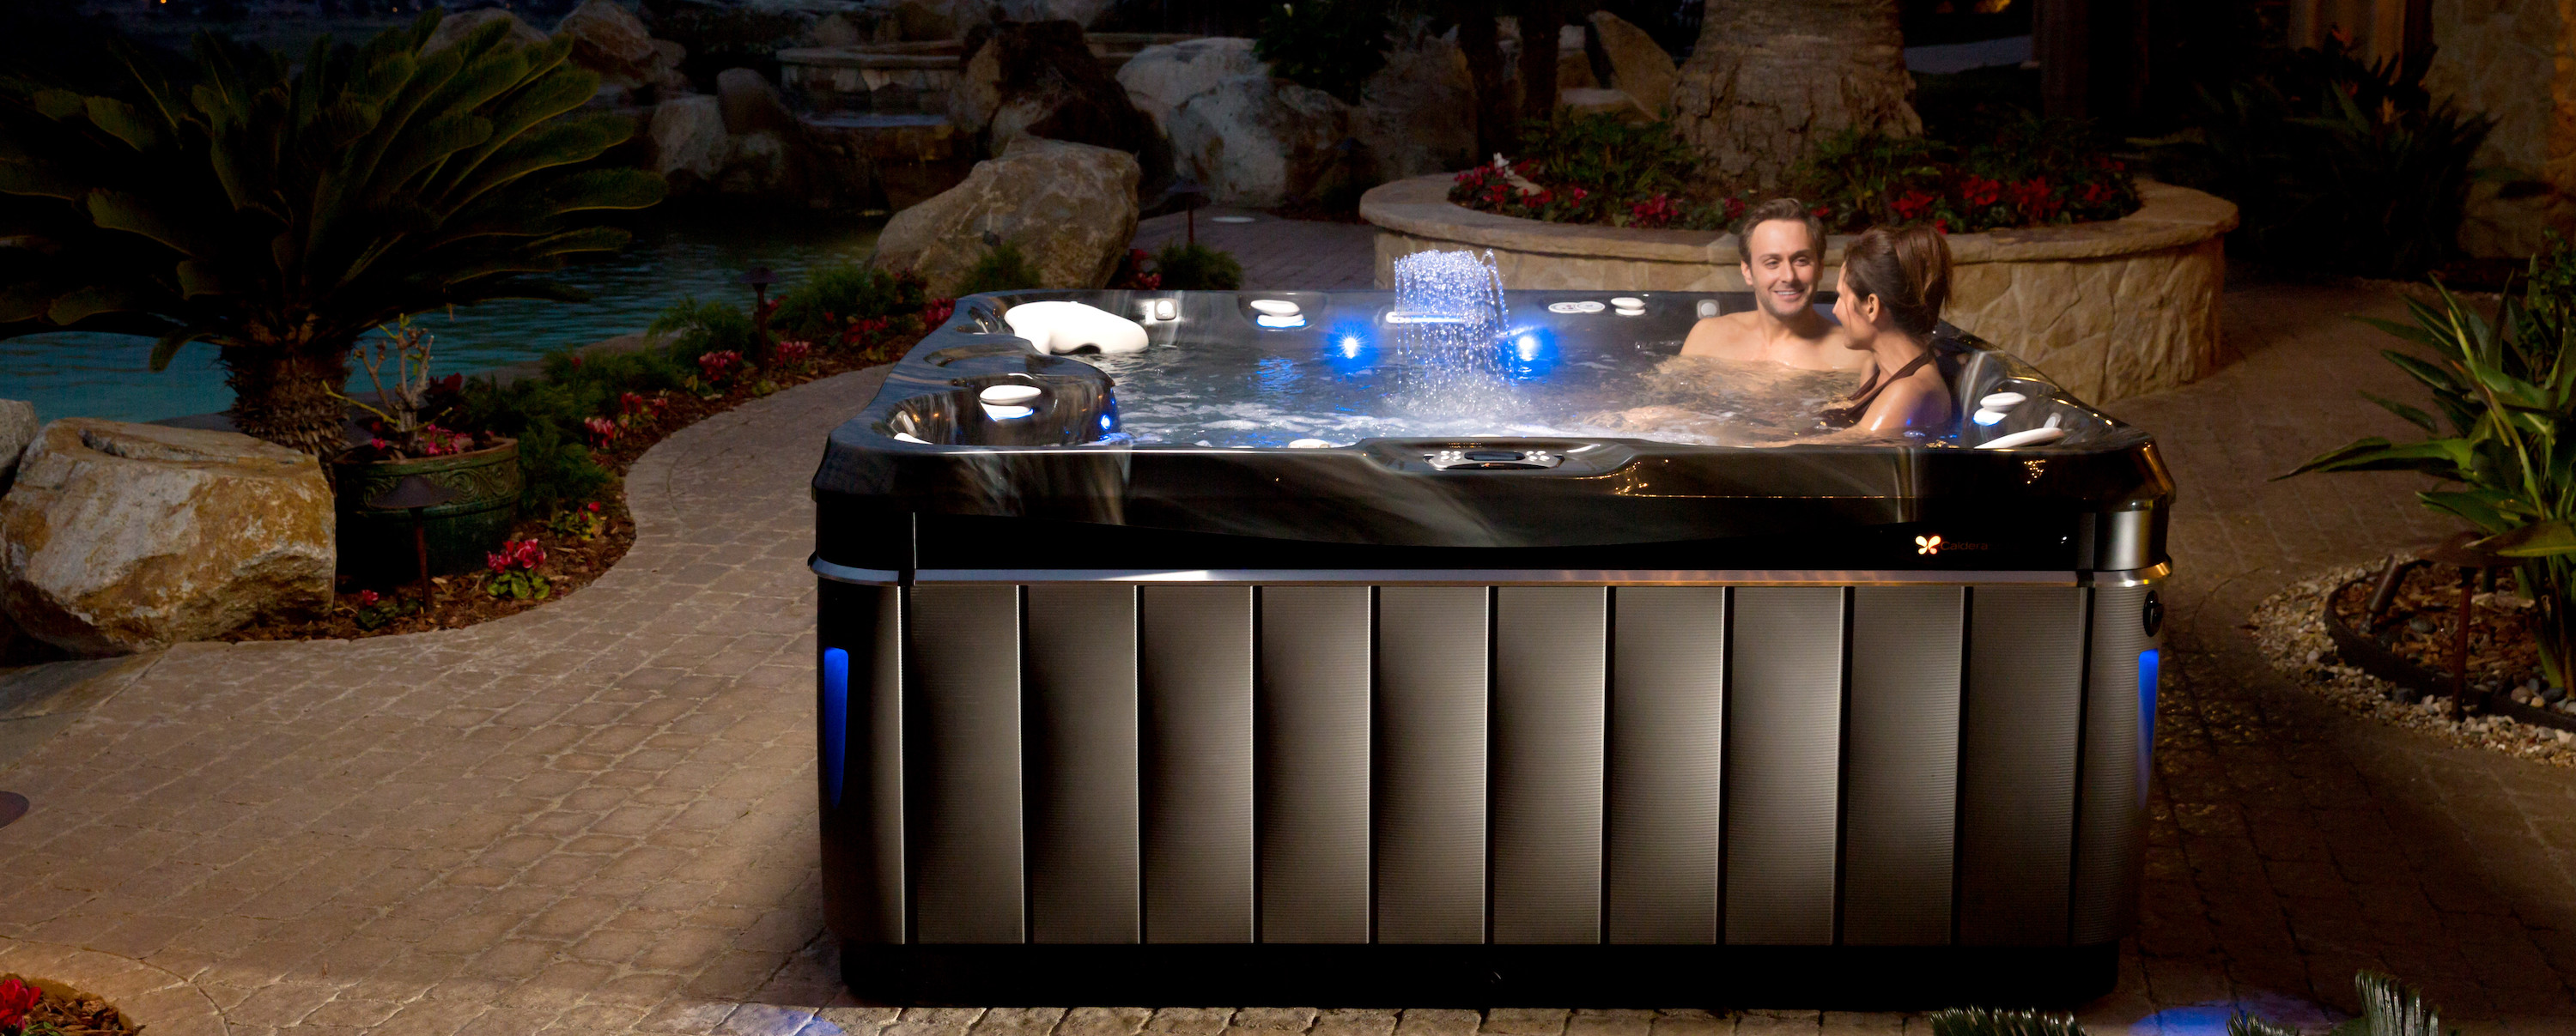 Jacuzzi Vs Hot Tub Vs Spa What S The Difference